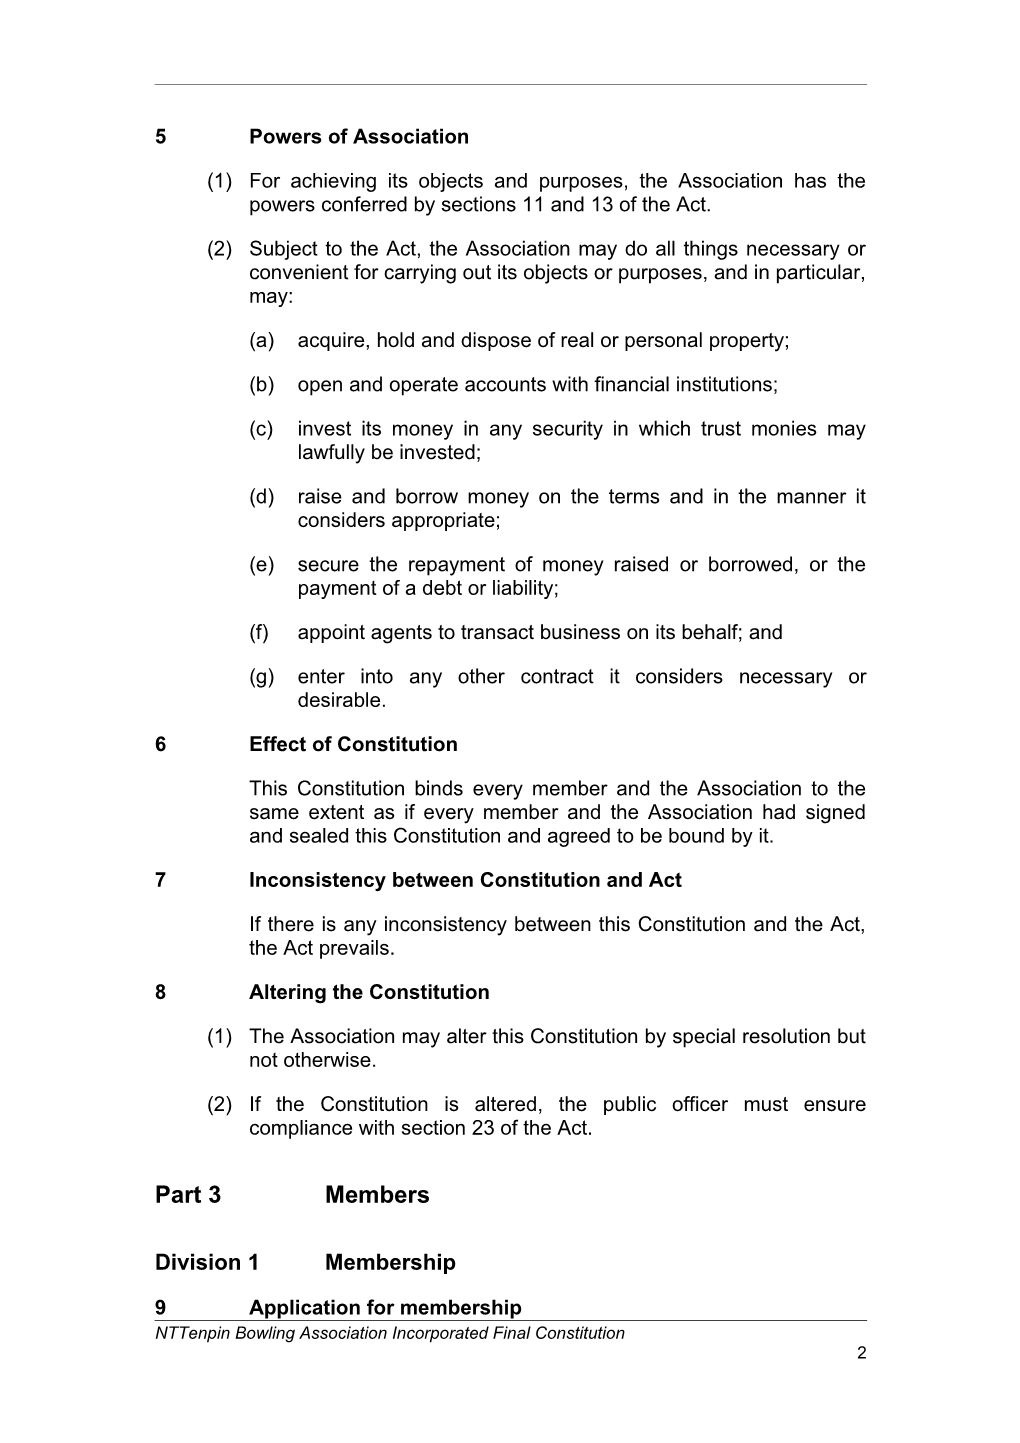 CONSTITUTION of the N.T. Tenpin Bowling Association Incorporated